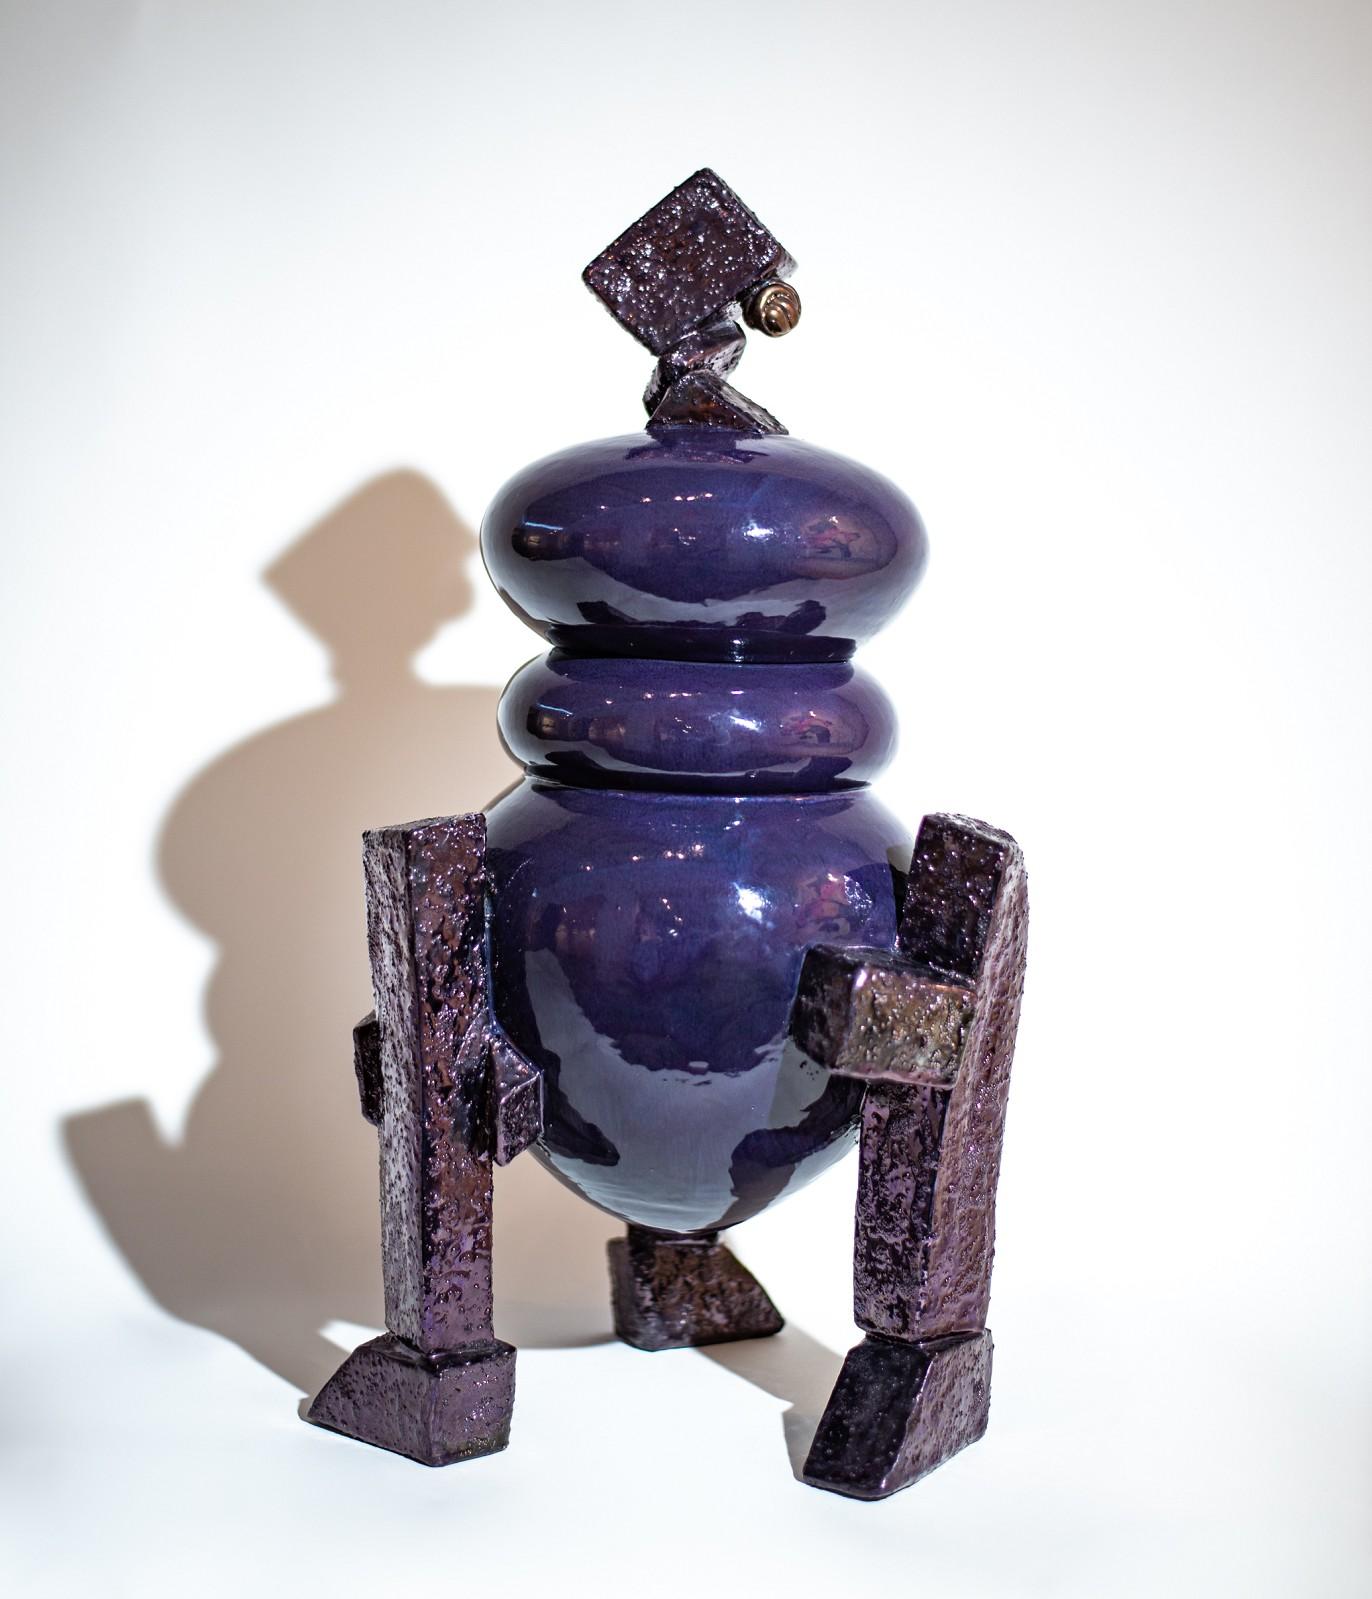 Jerry Rothman Abstract Sculpture - Ritual Vessel Tureen - large, purple, decorative, abstract glazed ceramic vessel